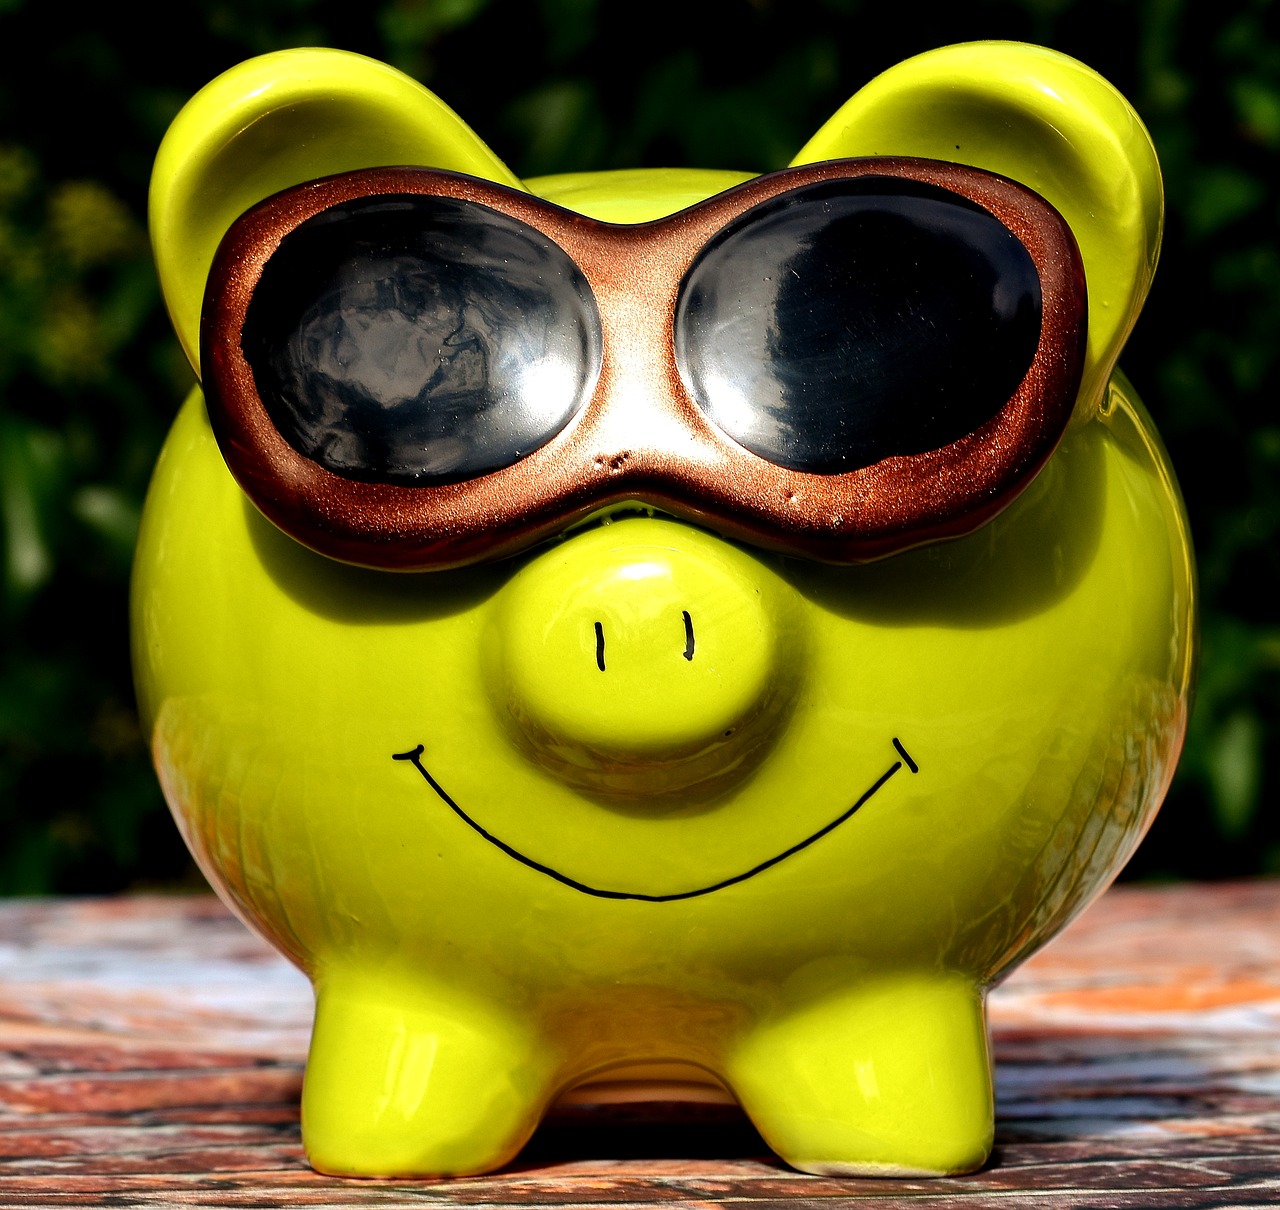 lucky pig cool sunglasses free photo